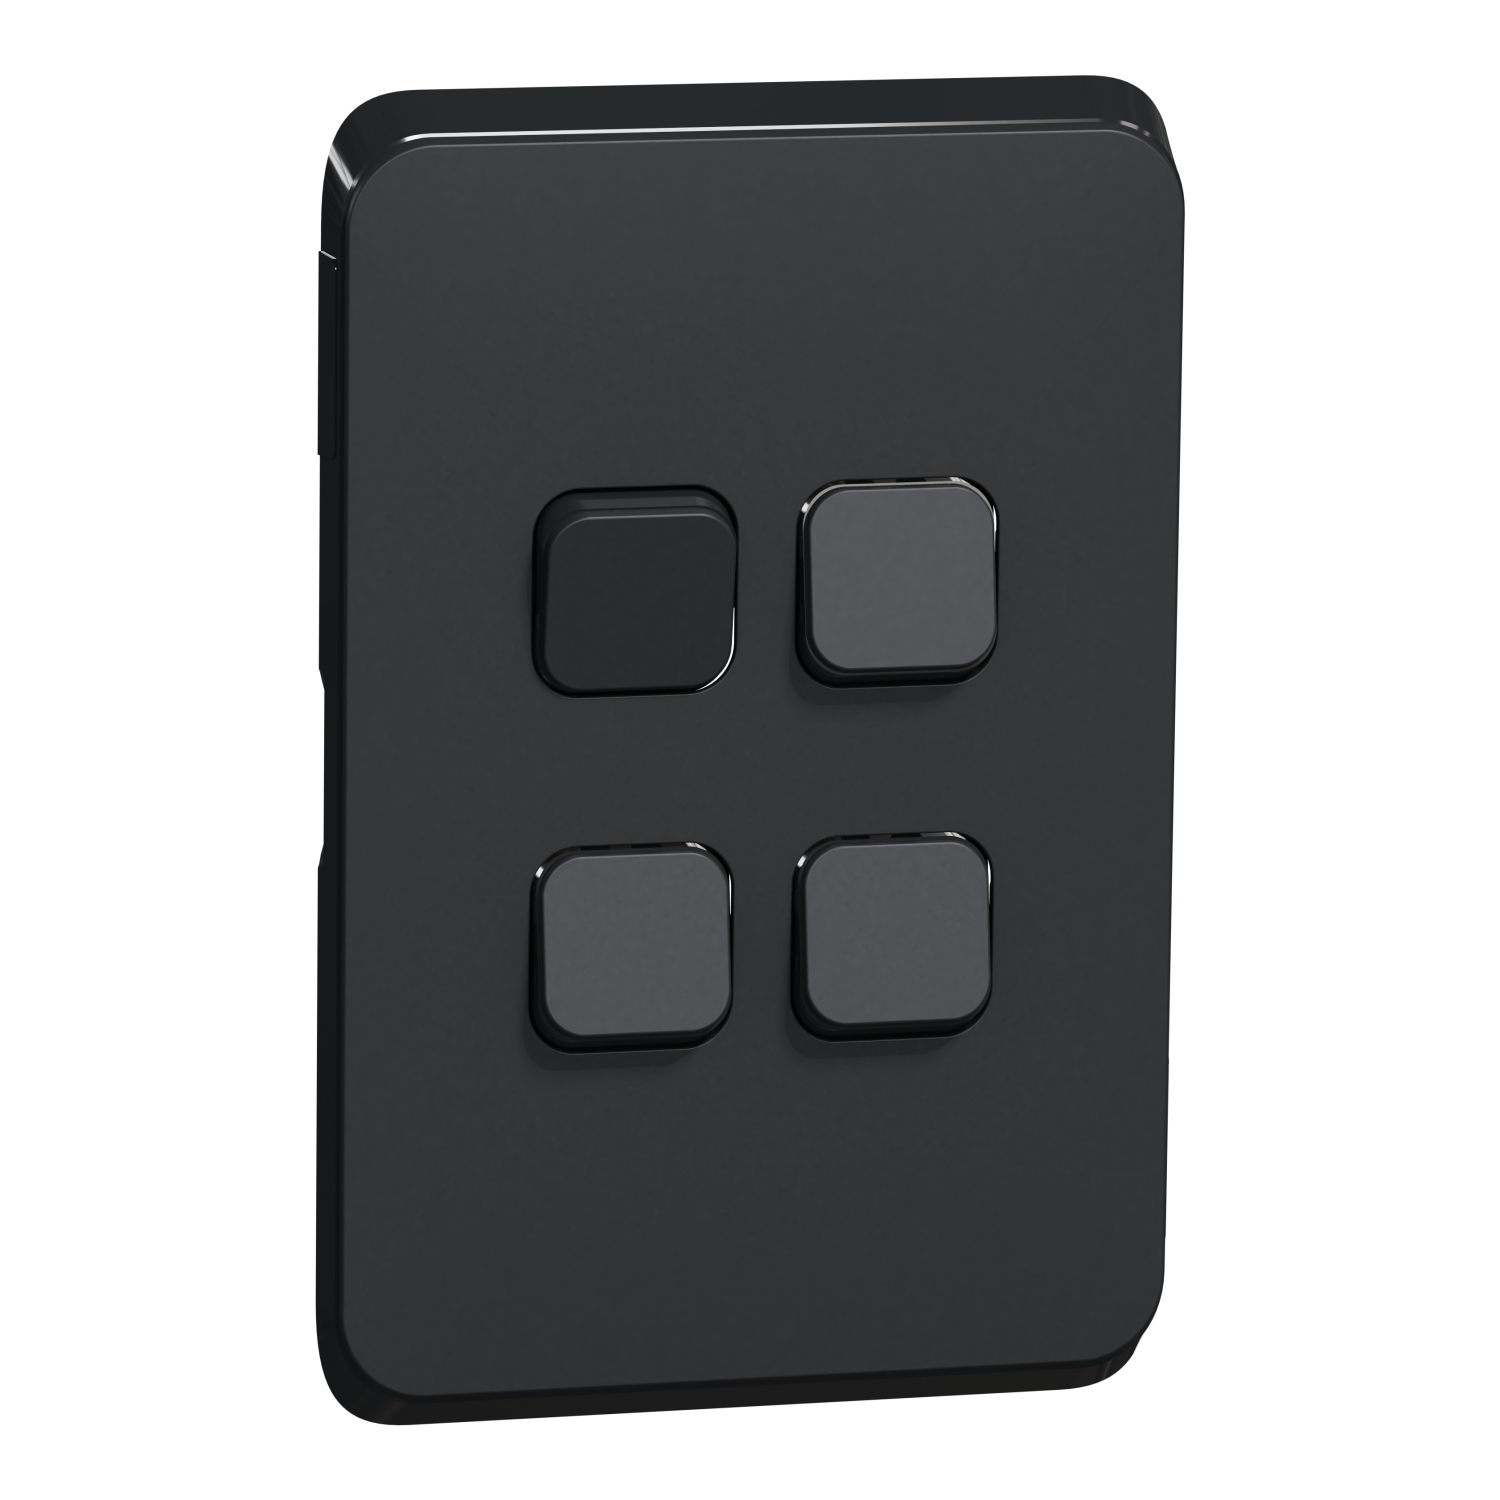 PDL Iconic - Cover Plate Switch 4-Gang - Solid Black